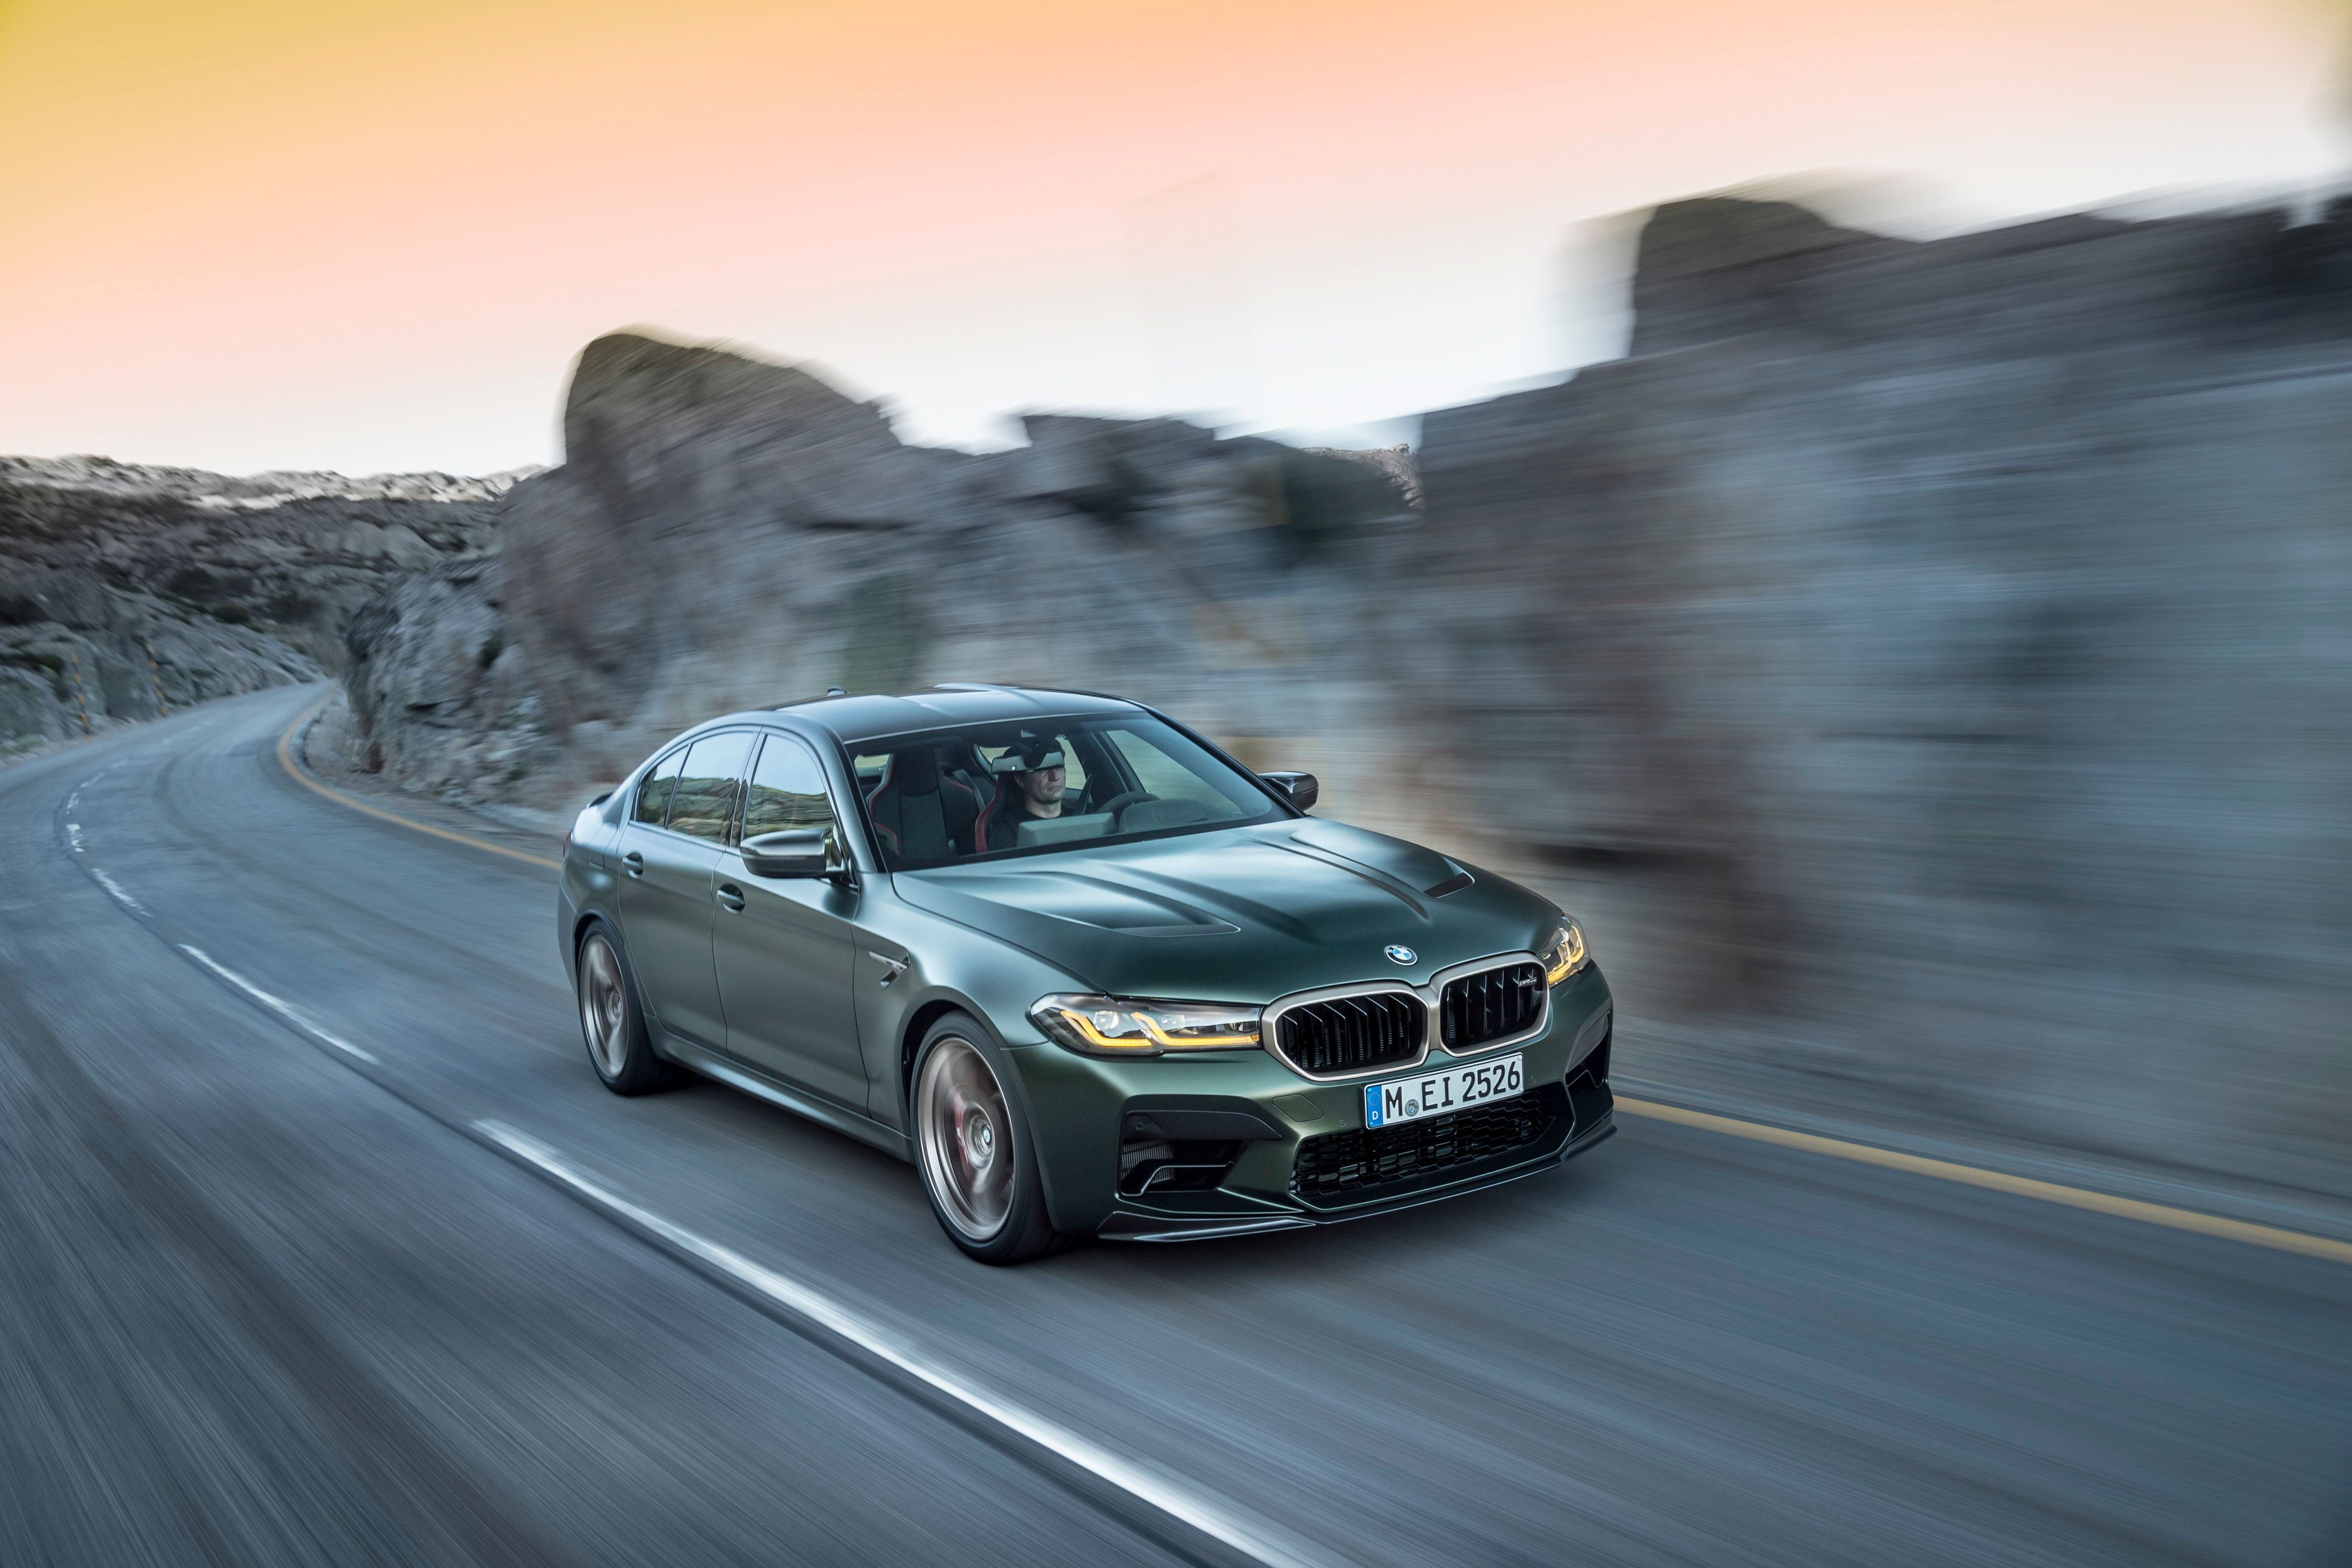 2021 - 2022 The BMW M5 CS Has The Best Weight-to-Power Ratio Of Any M Car On The Planet